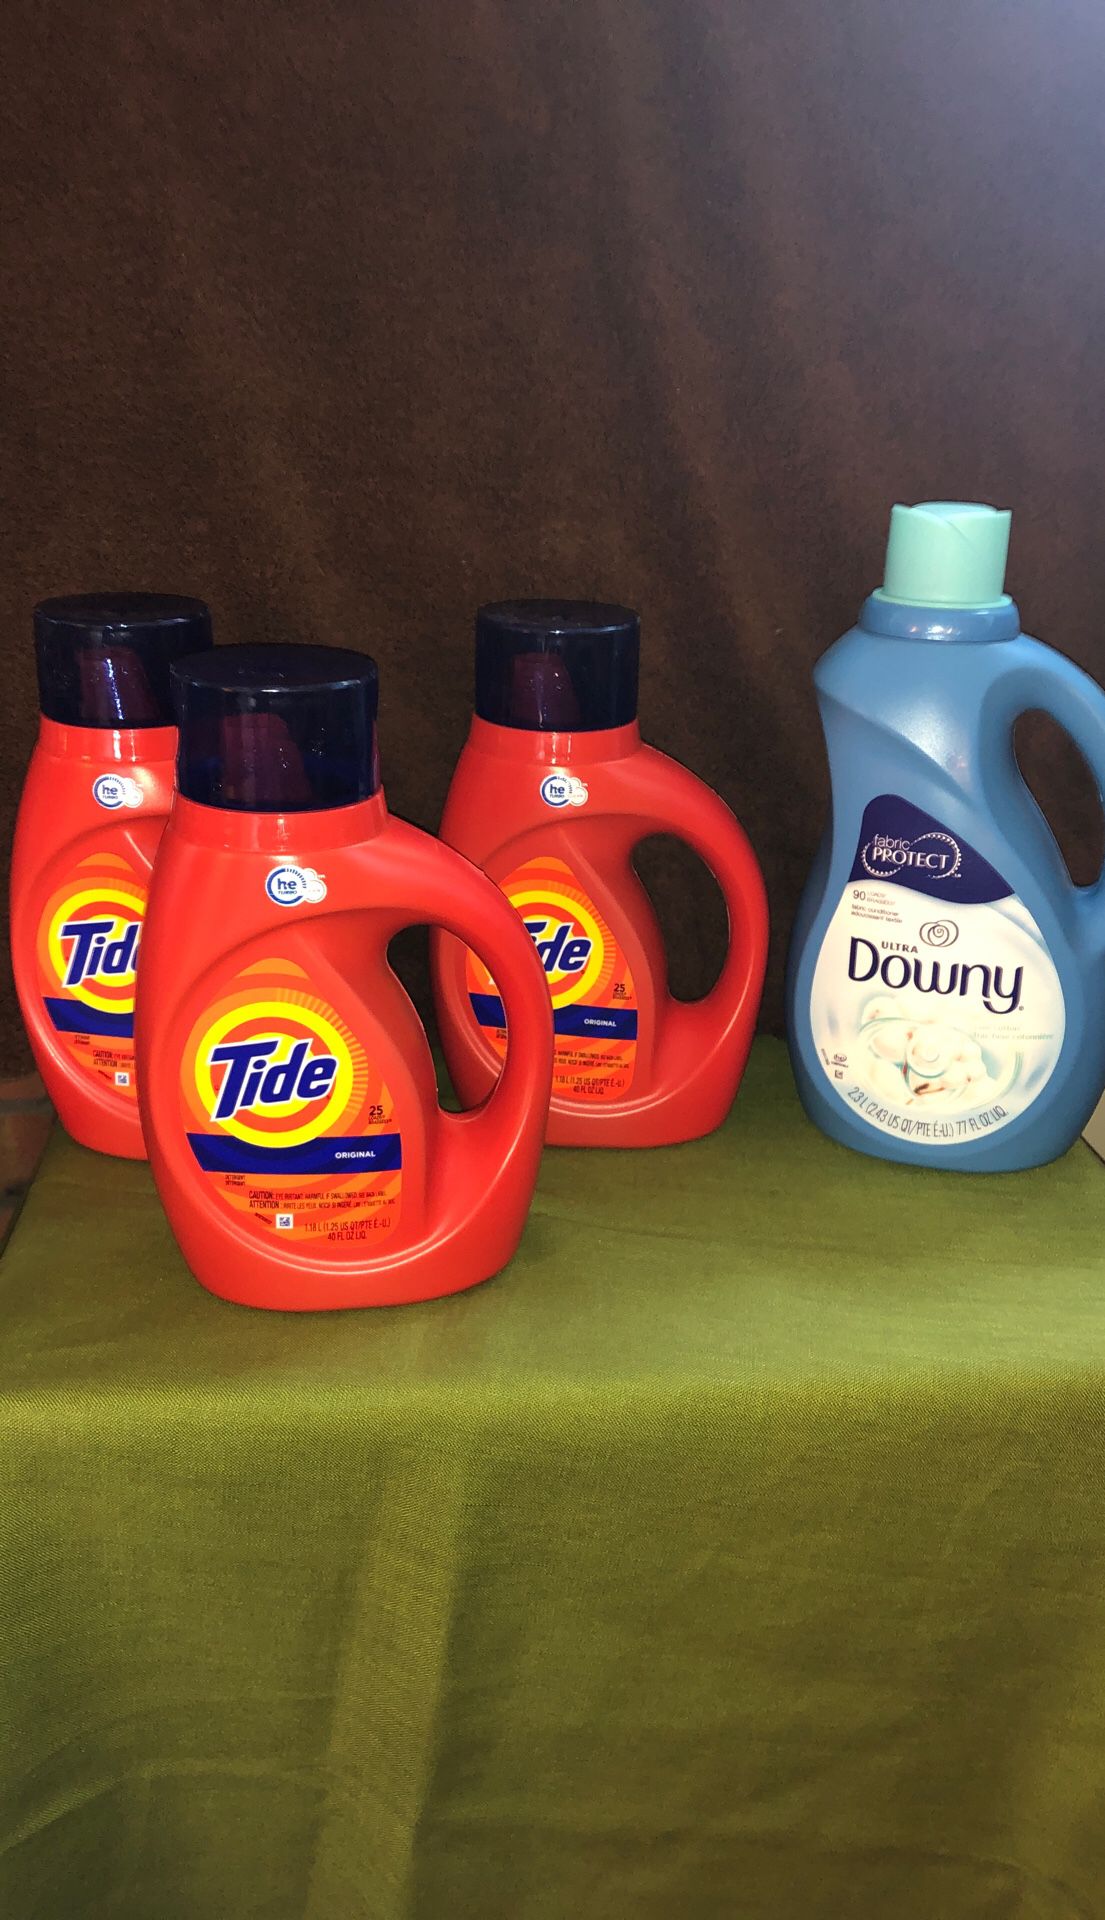 Laundry detergent and fabric softener